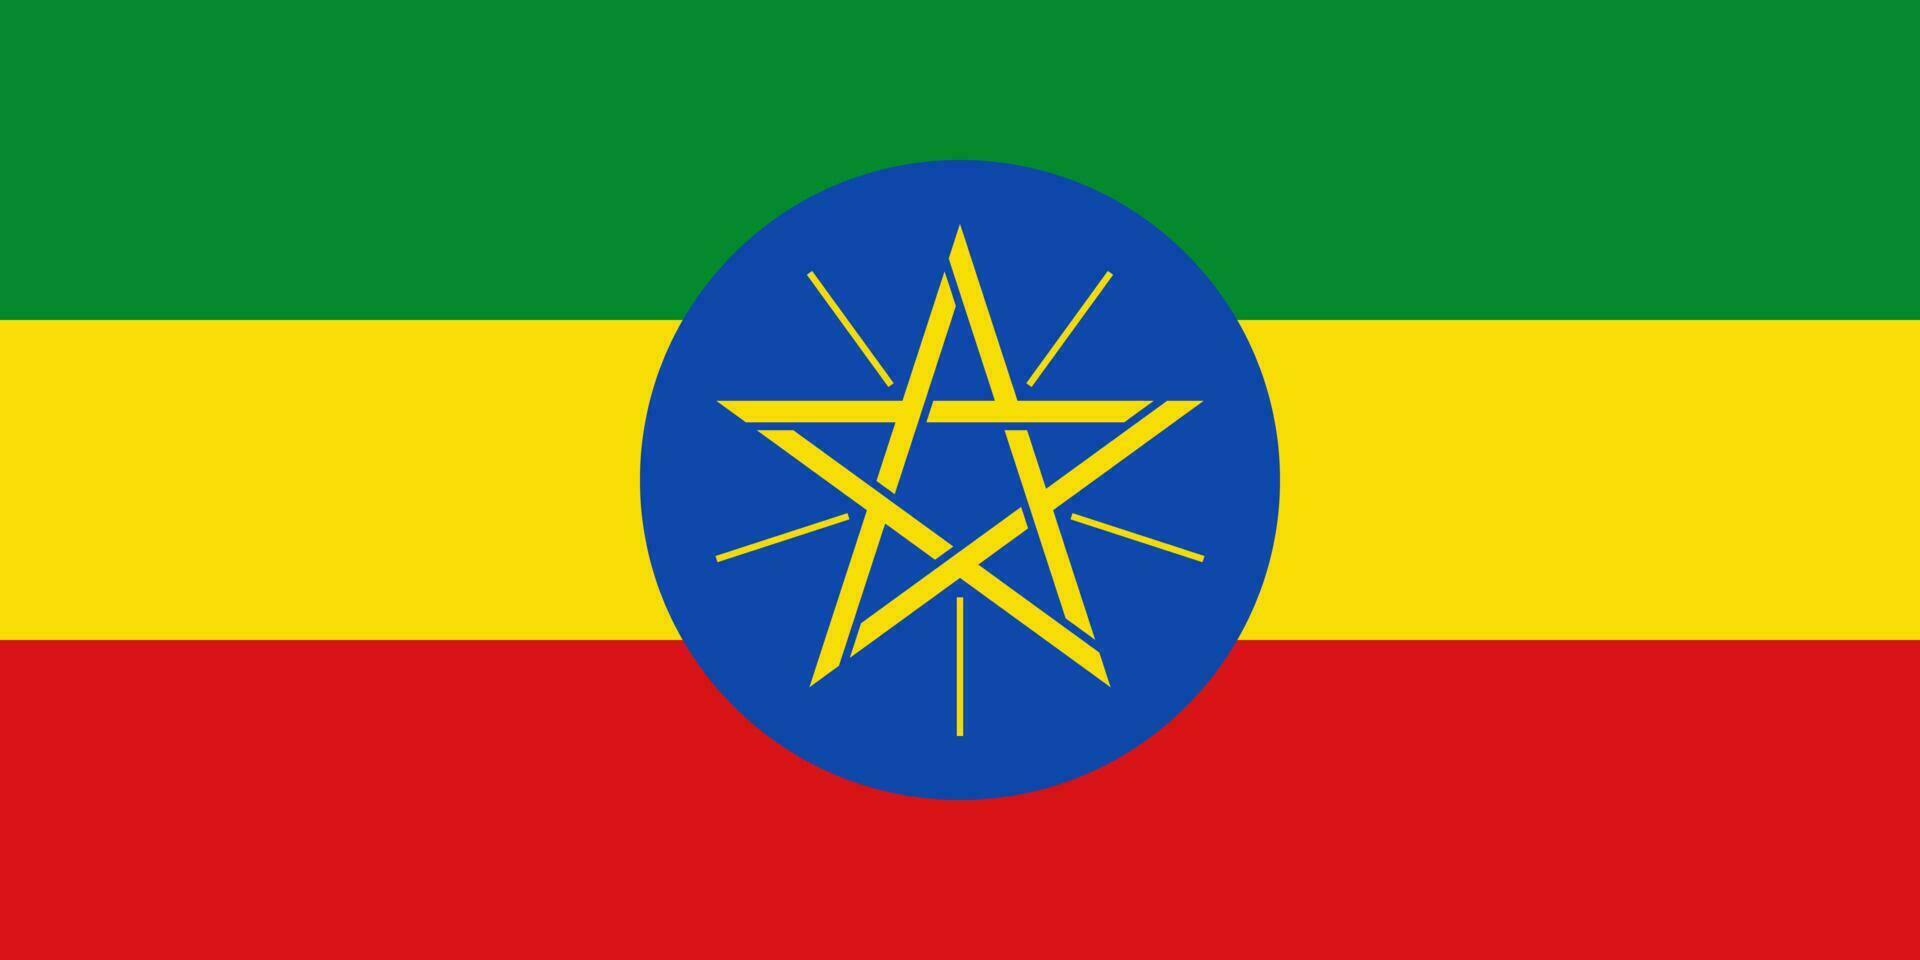 Ethiopia flag, official colors and proportion. Vector illustration.